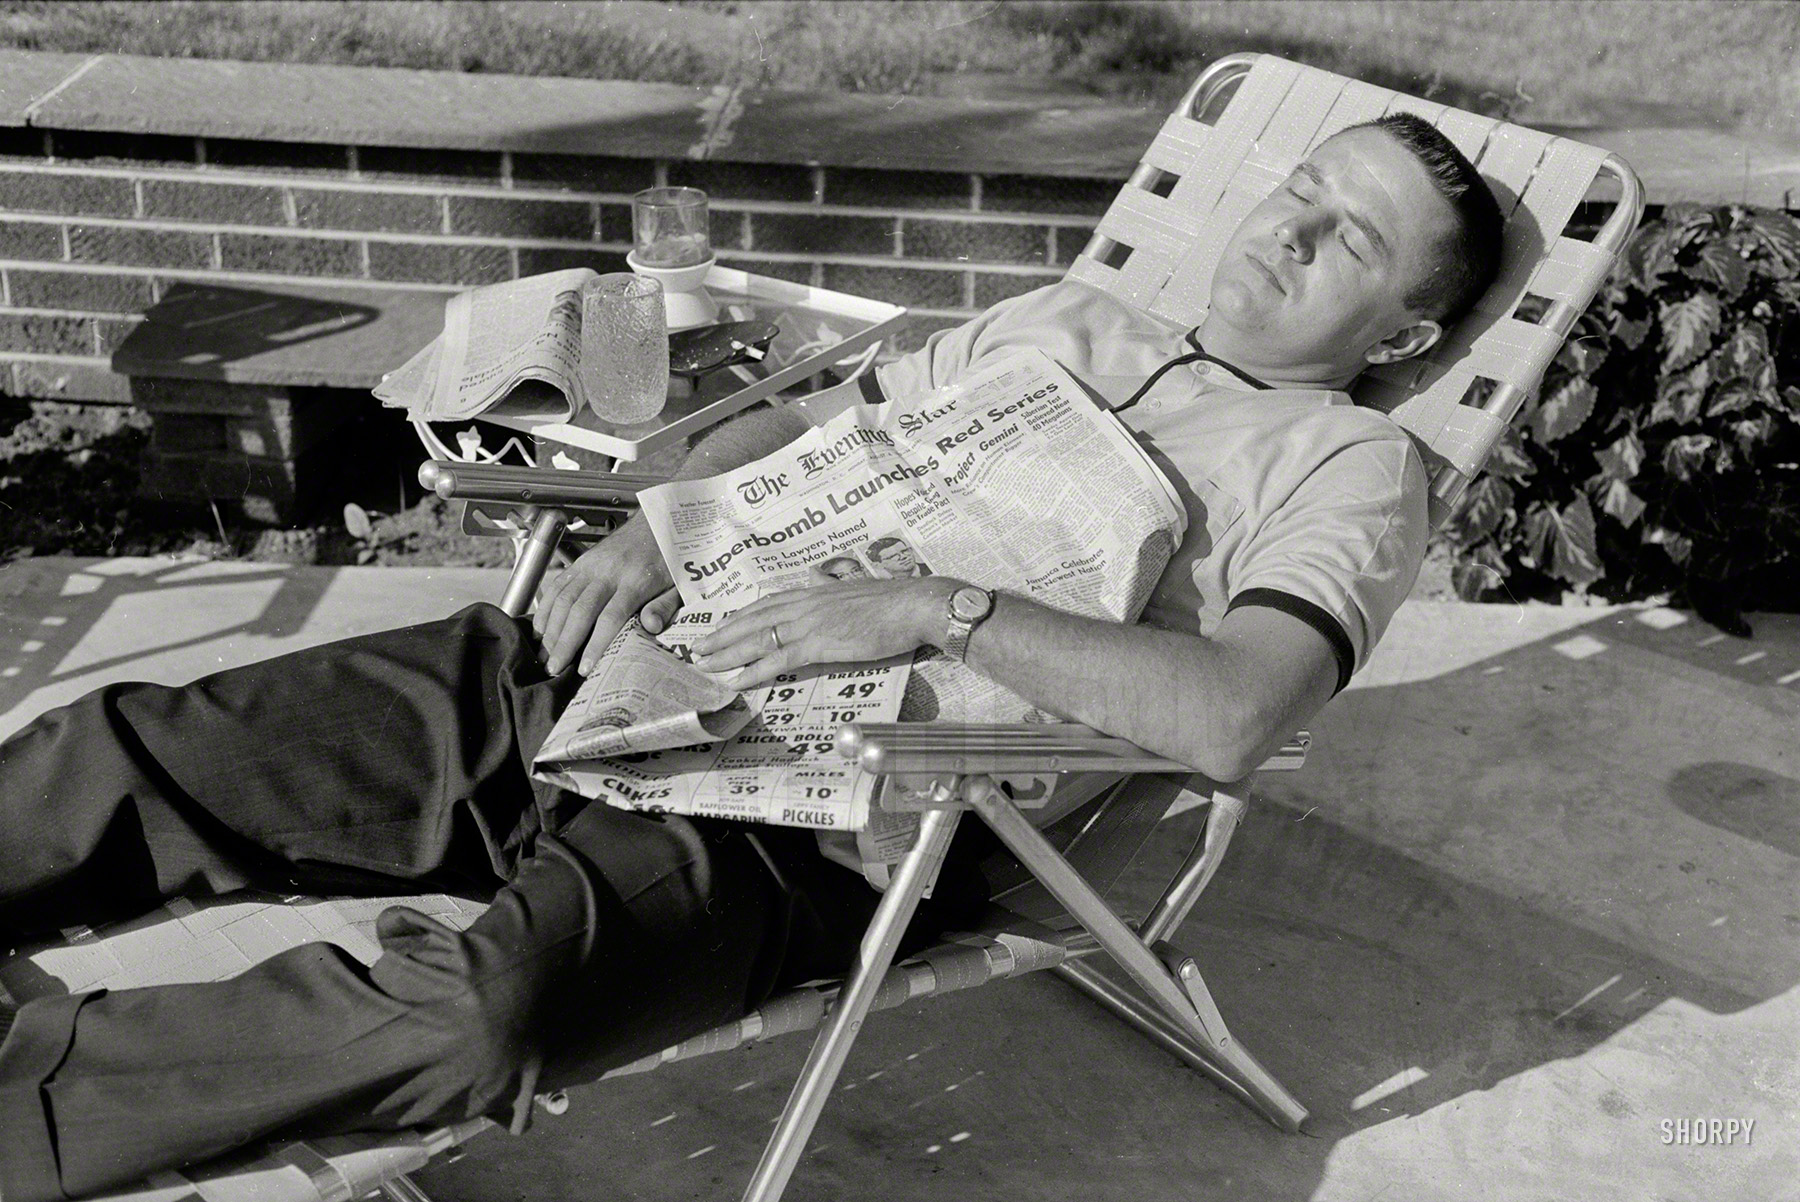 Aug. 8, 1962. Washington, D.C. "Man in lounge chair representing U.S. indiffer&shy;ence" to world affairs at the height of the Cold War. The headline: "Superbomb Launches Red Series -- Siberian Test Believed Near 40 Megatons." Photo by Thomas O'Halloran for U.S. News & World Report. View full size.